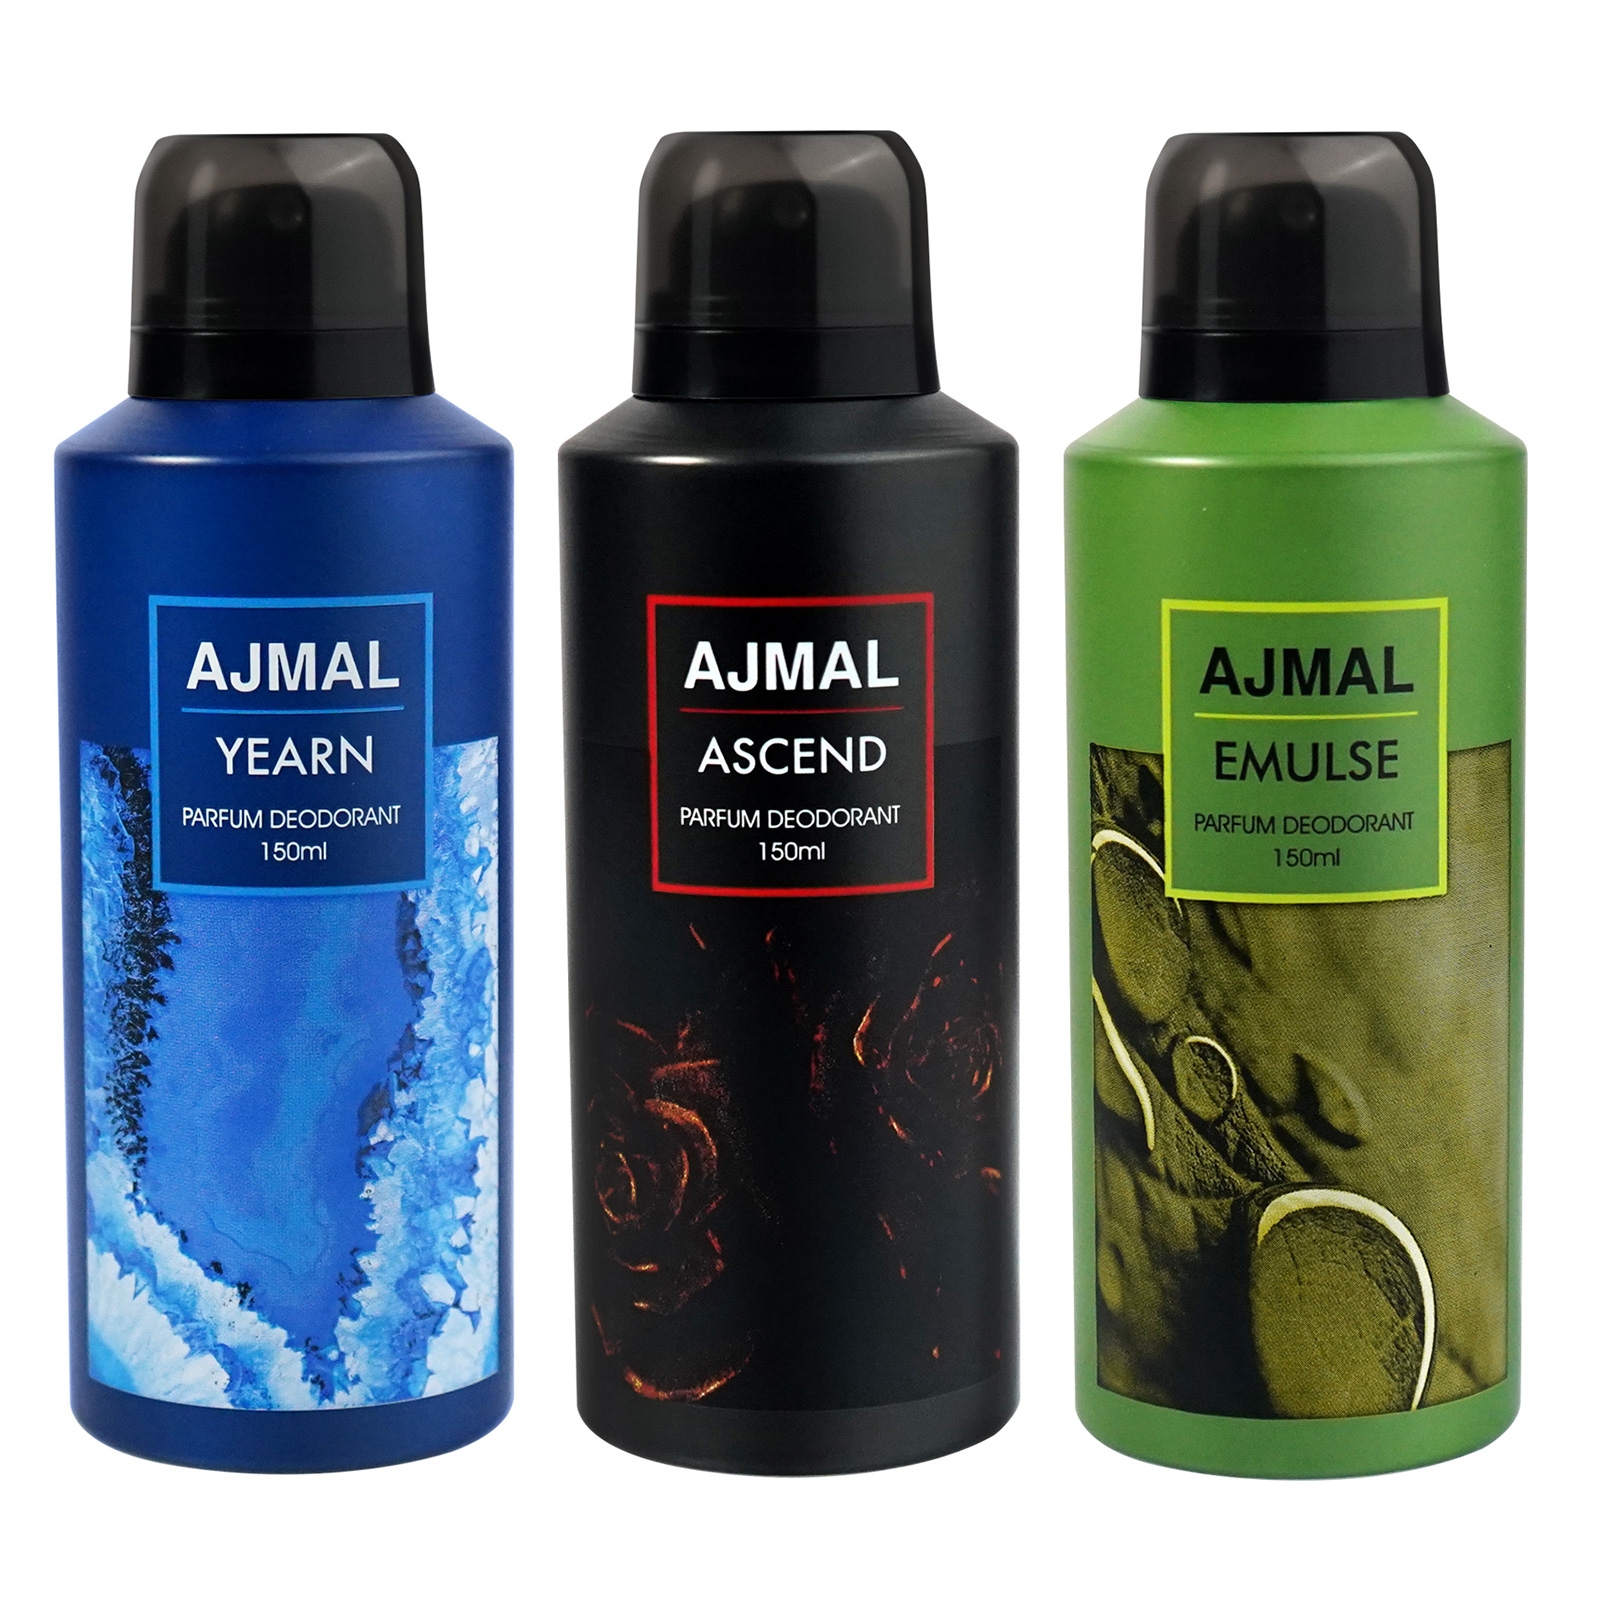 Ajmal Yearn, Ascend and Emulse Deodorant Perfume 150ML Each Long Lasting Spray Party Wear Gift For Men and Women Online Exclusive